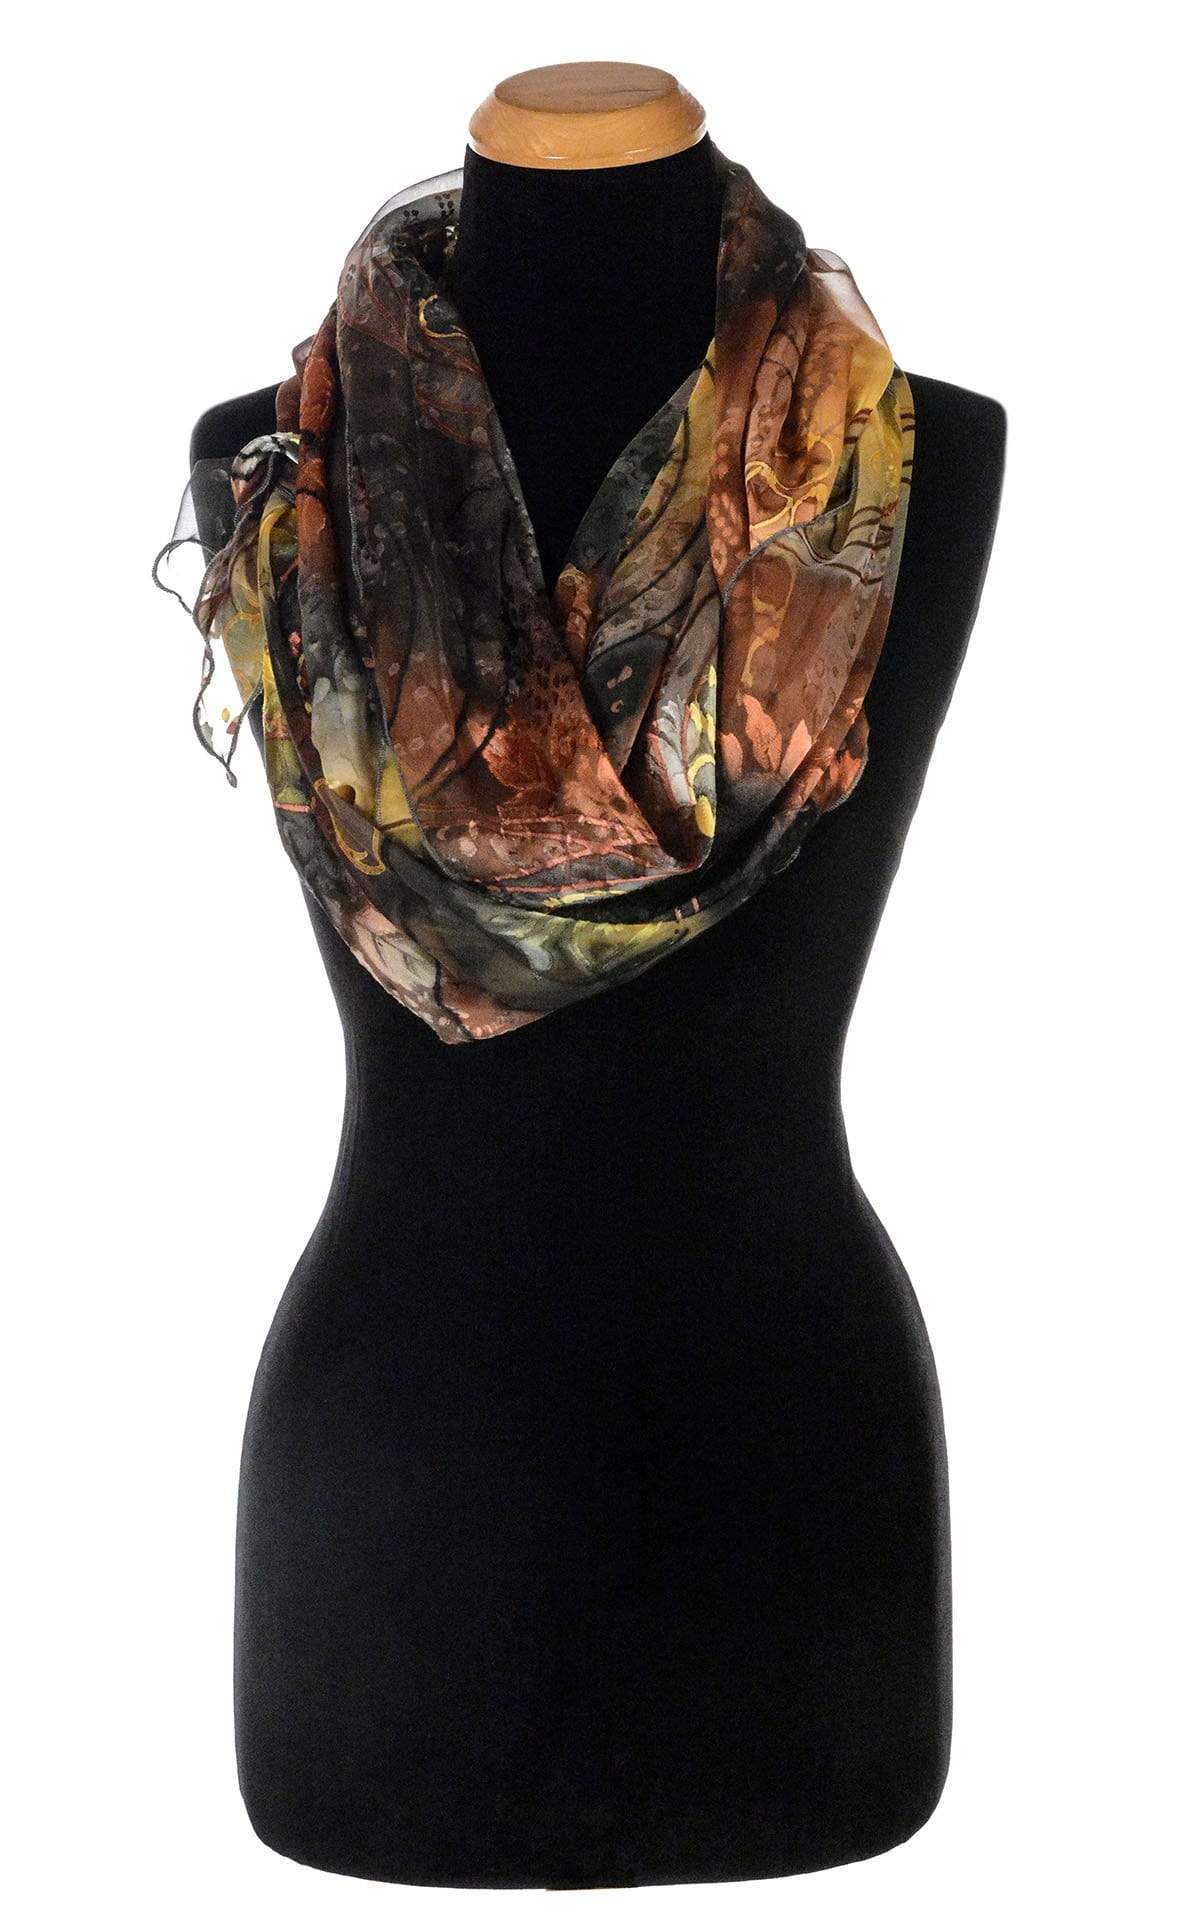 Women’s Large Handkerchief Scarf, Wrap in hand-painted silk on a mannequin shown wrapped twice | Garden Path in Tiger Lily black, green, rust, yellow, and Gray | Handmade in Seattle WA | Pandemonium Millinery